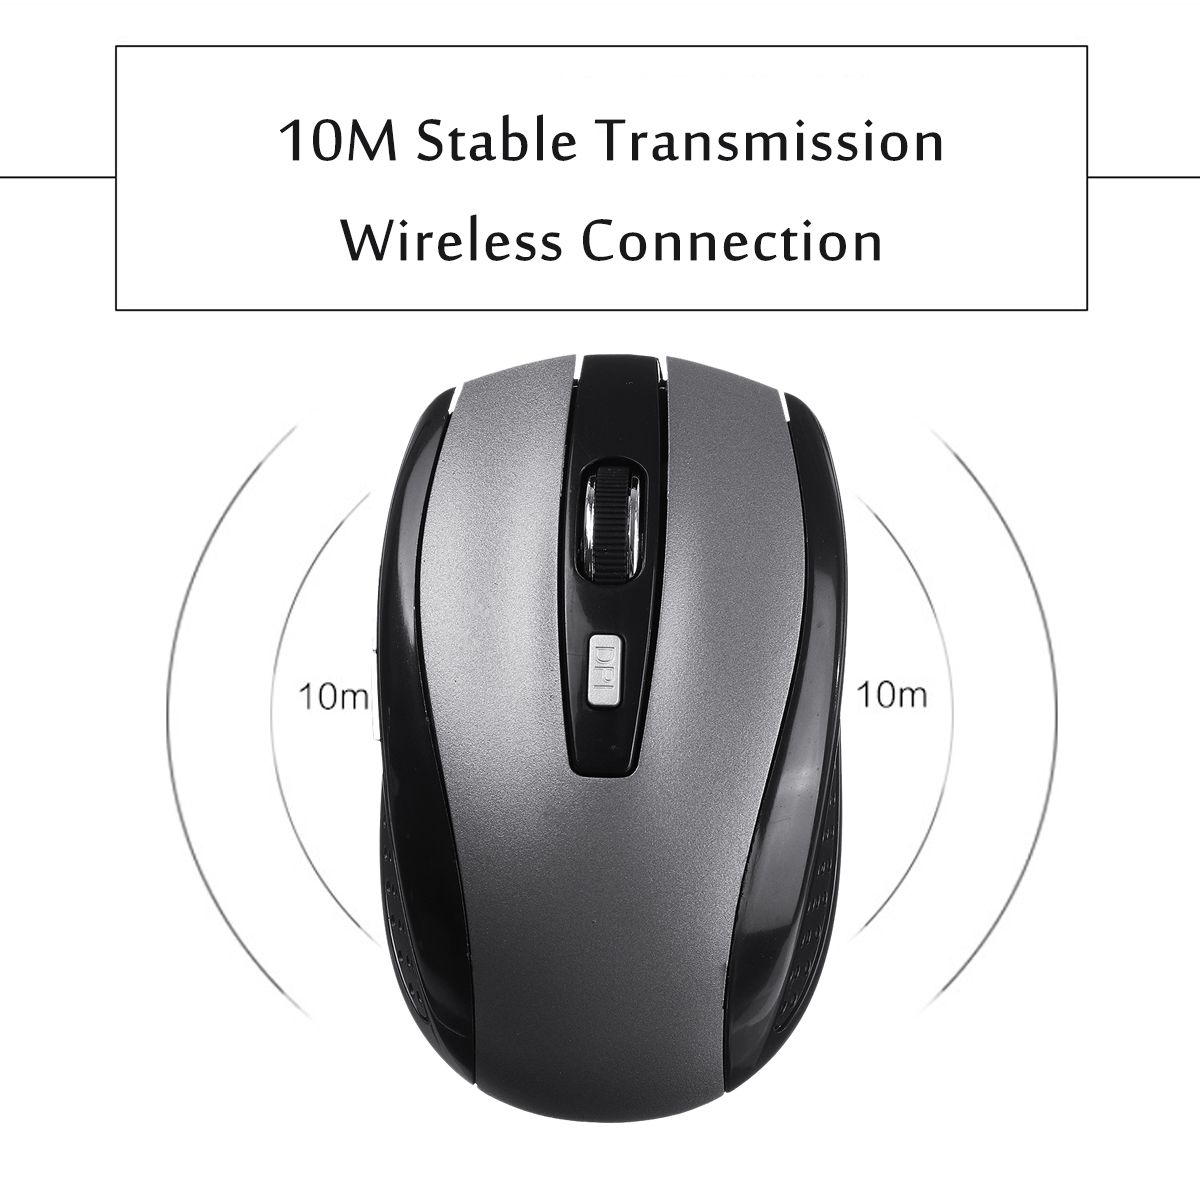 24G-Wireless-Gaming-Mouse-1600DPI-Antiskid-Mouse-for-Desktop-Computer-Laptop-PC-1756198